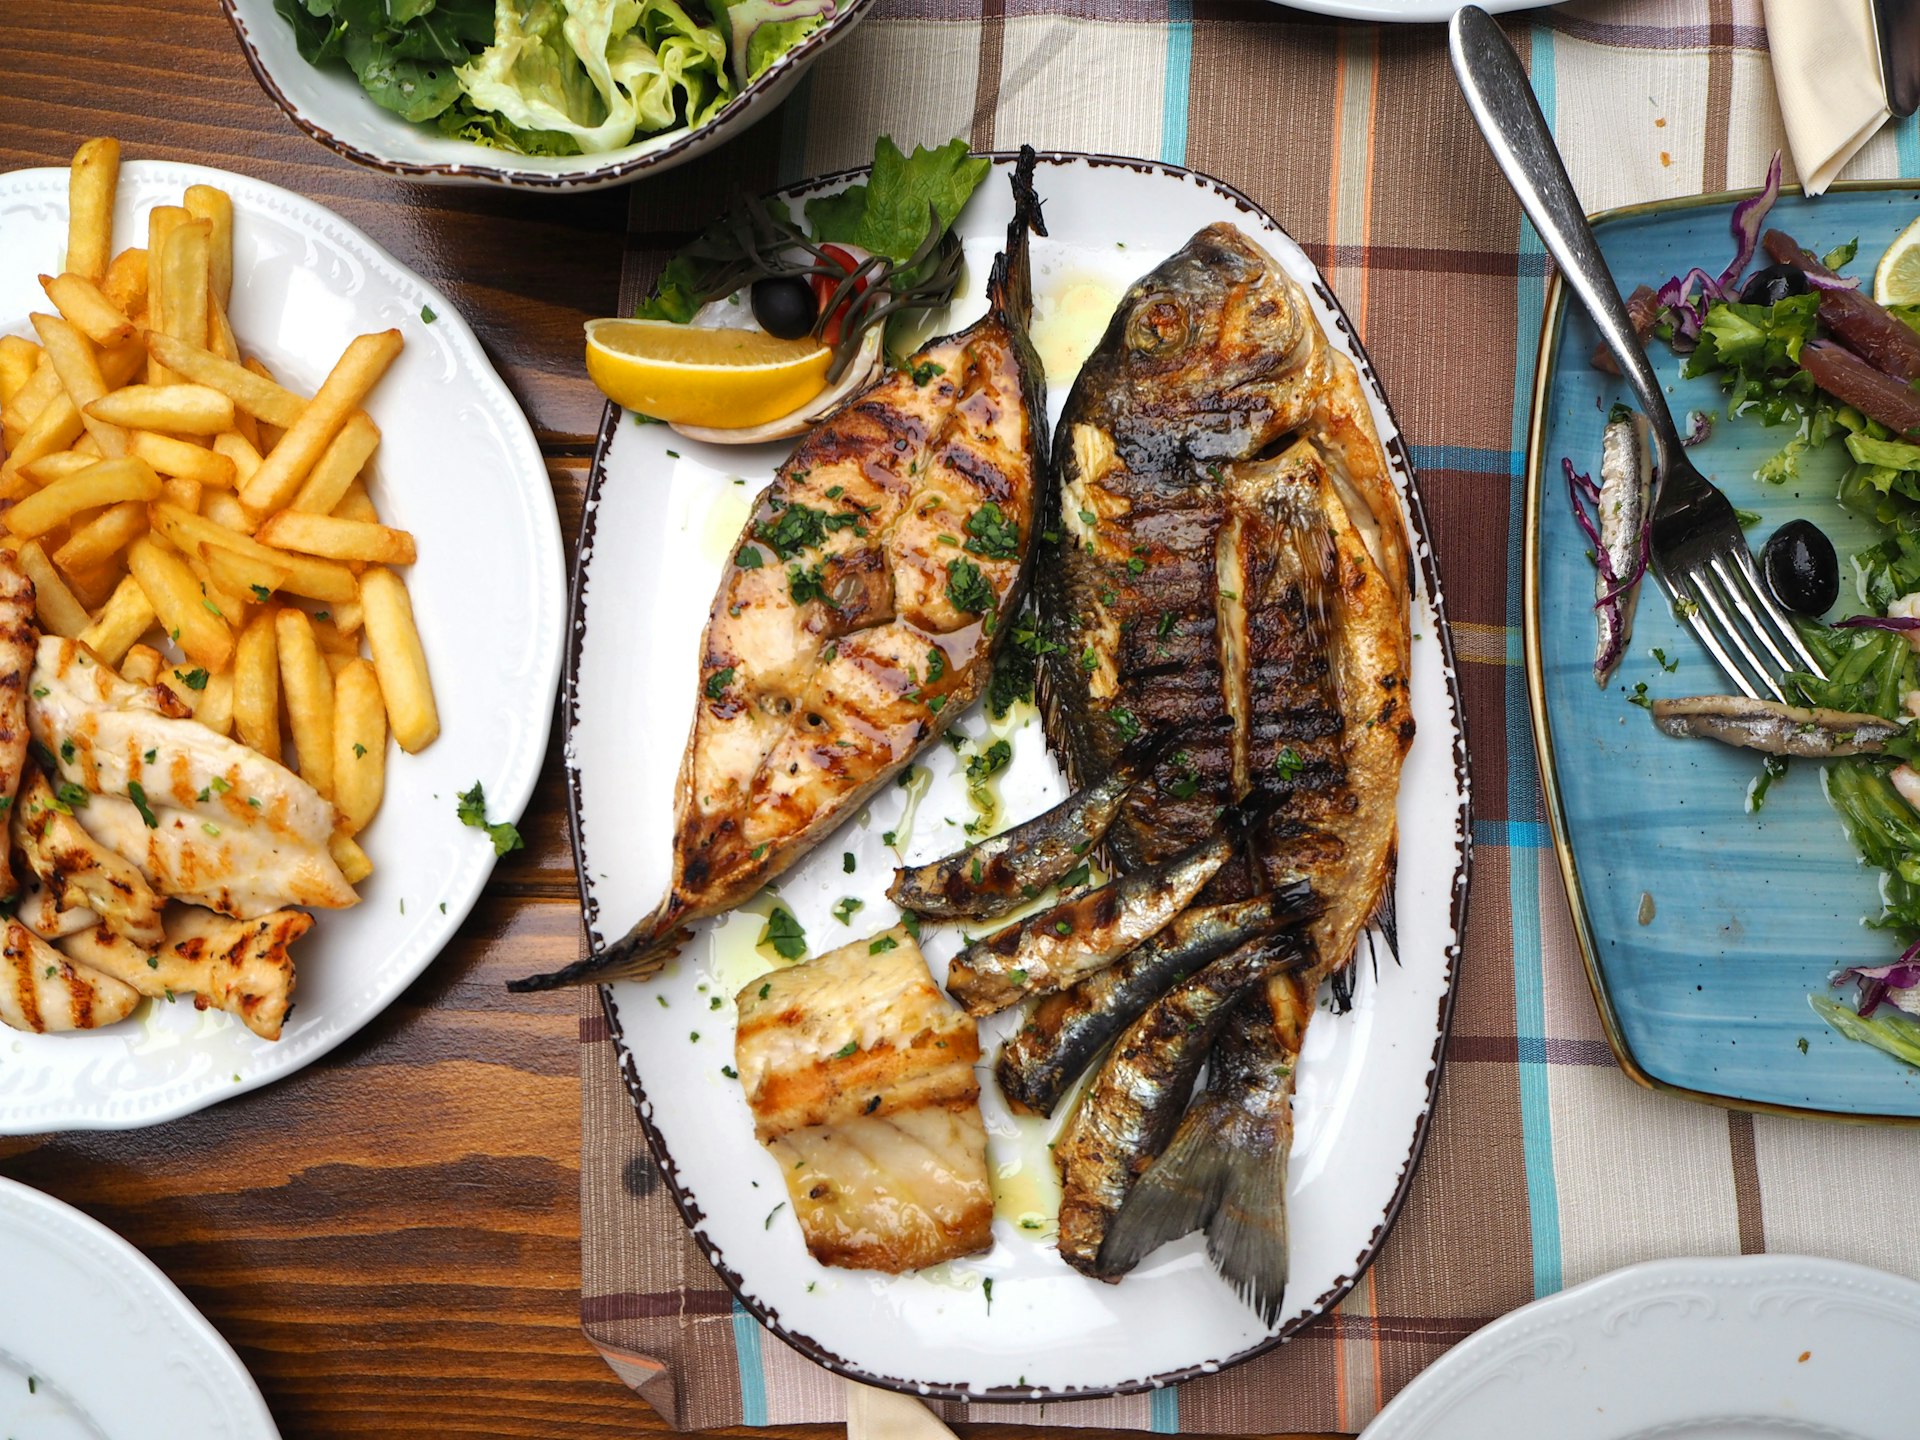 Plate of grilled fish, chips and salad in Dubrovnik